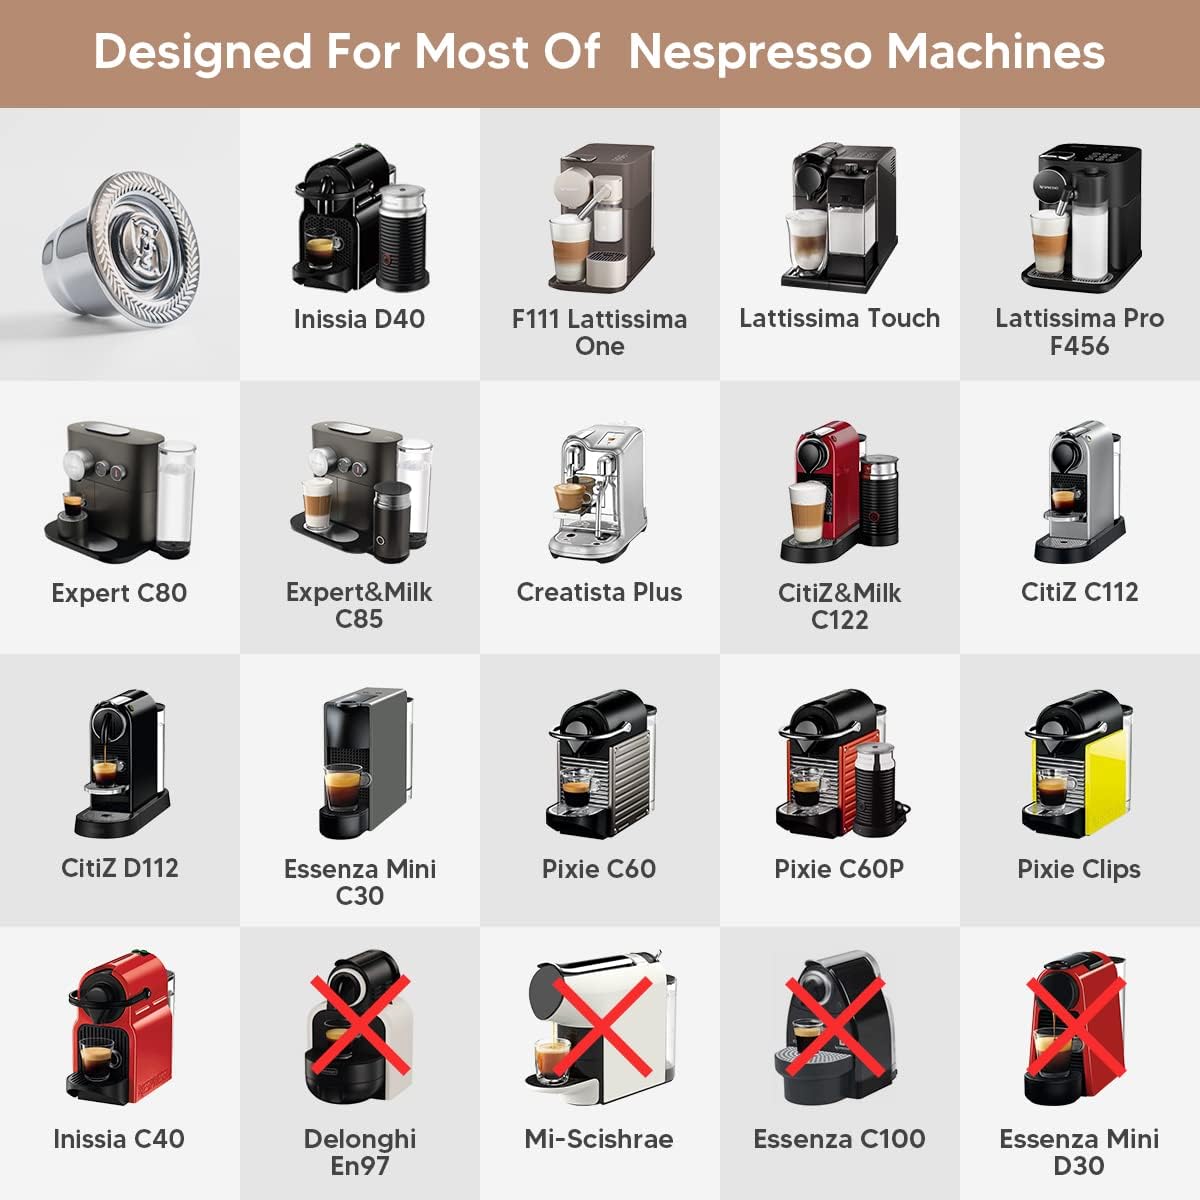 Comparing 5 Espresso Products: Capsules, Pods, and Machines